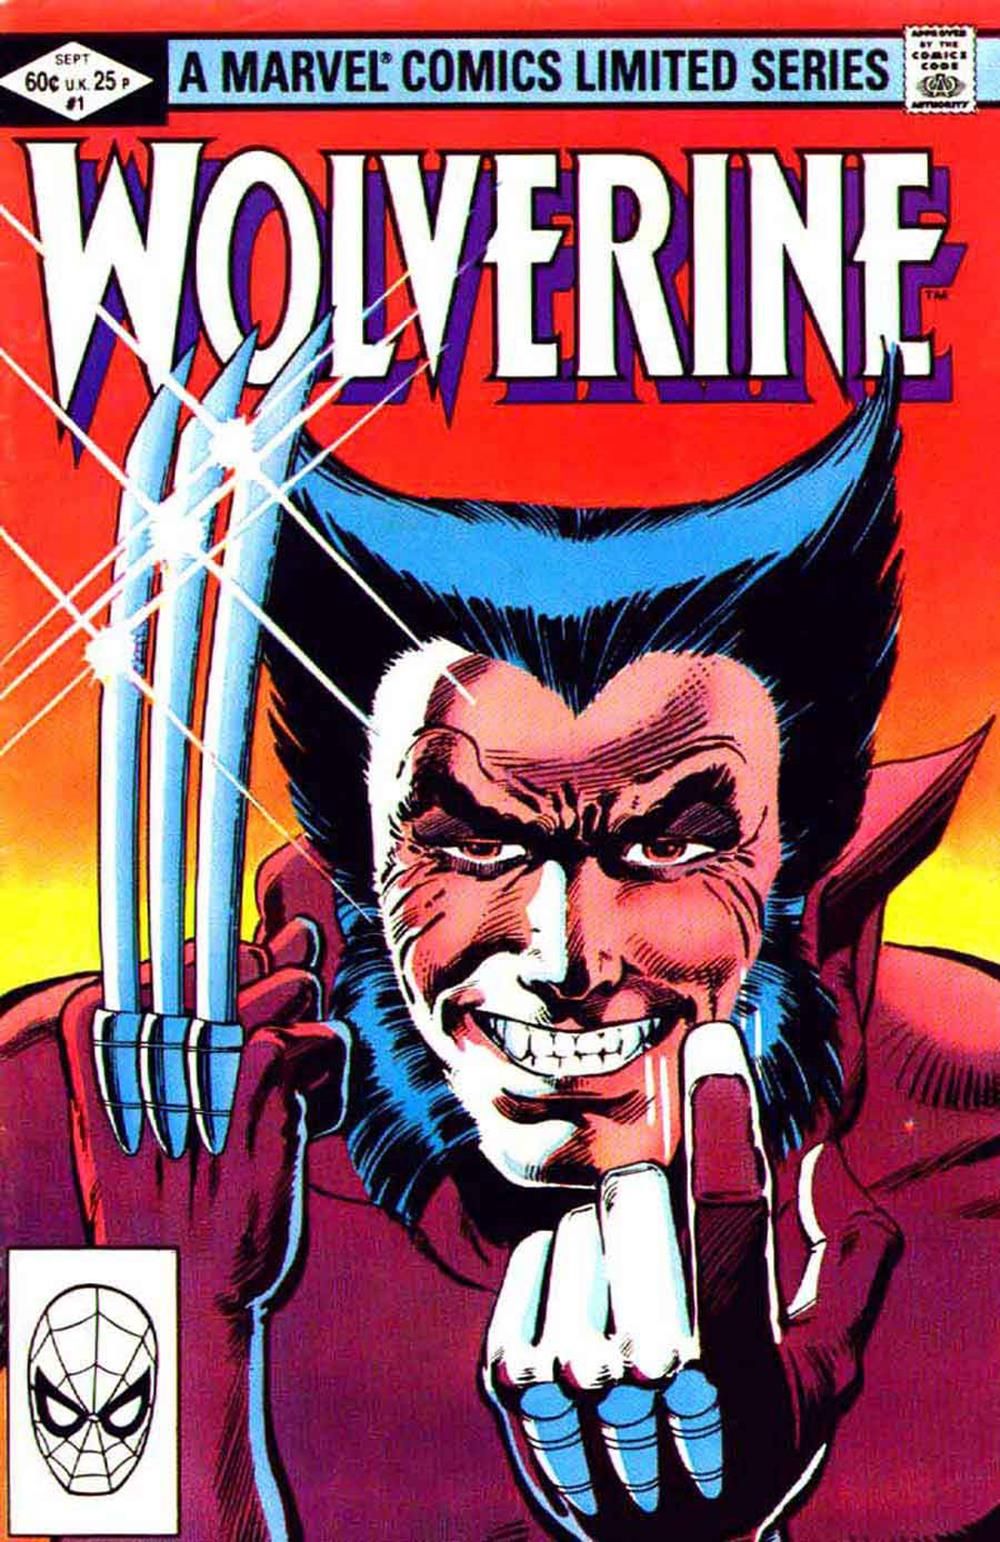 Frank Miller's Wolverine grins at the audience and beckons them in 